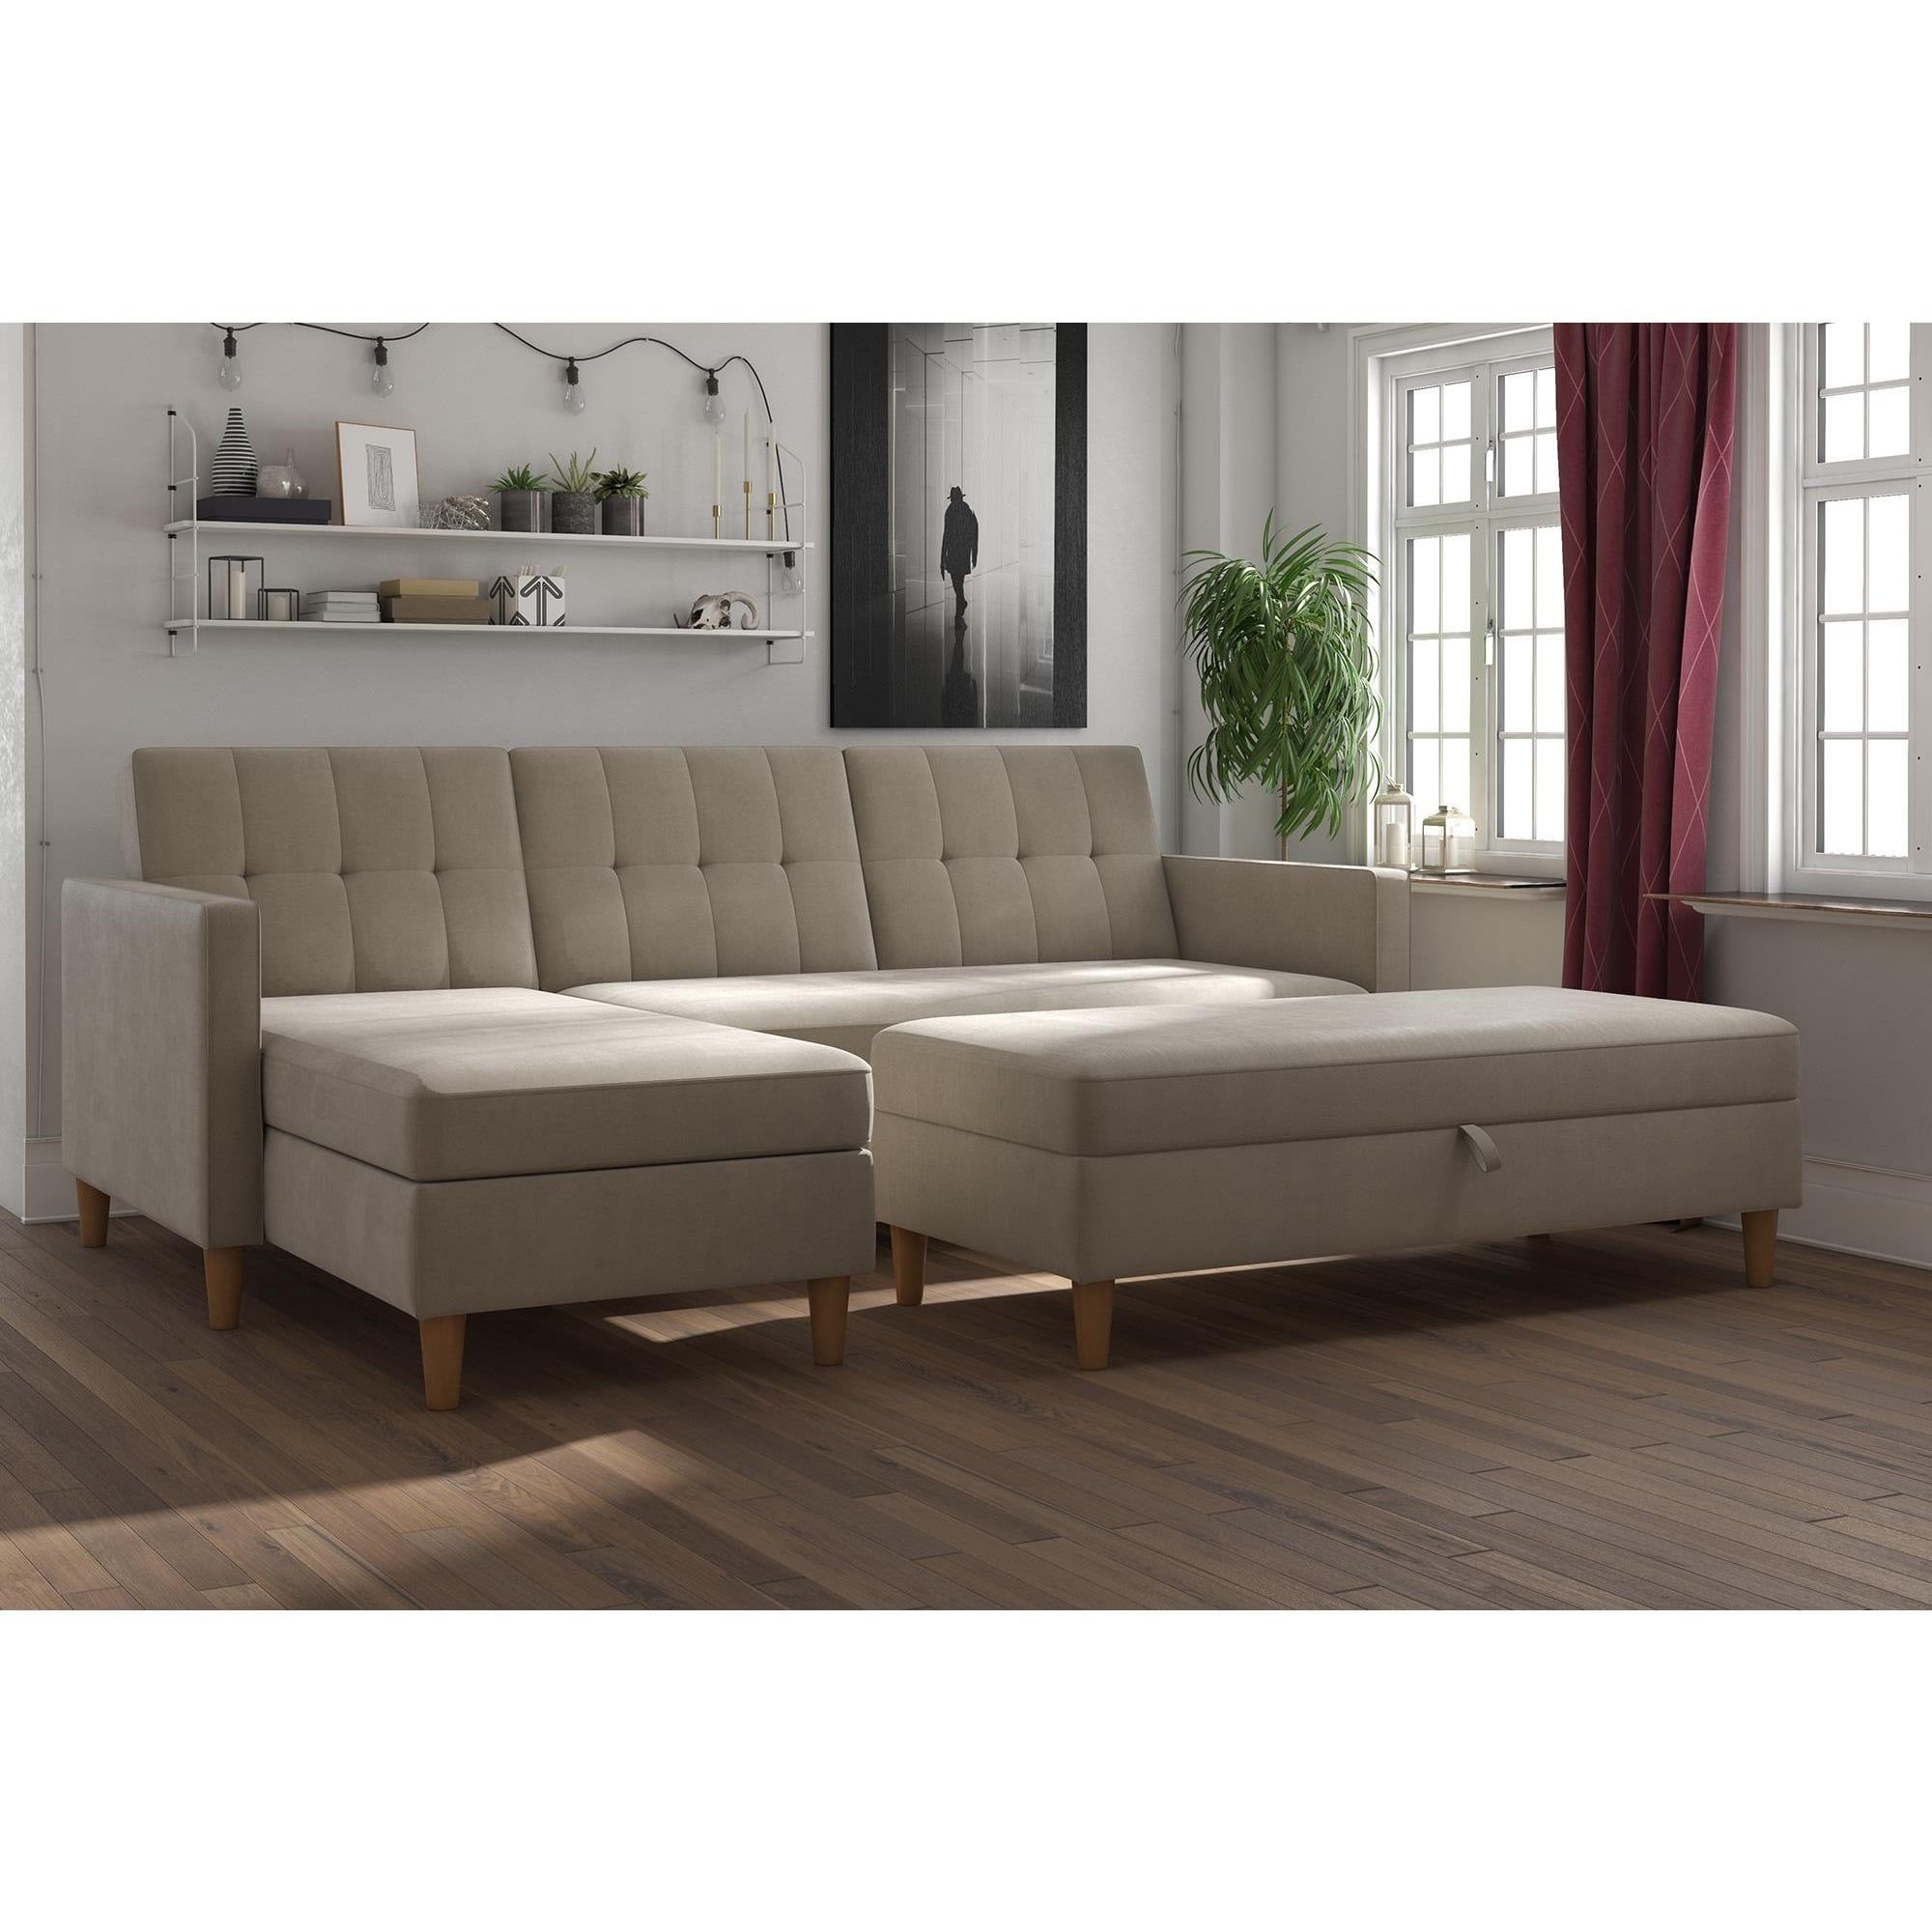 Our Best Living Room Furniture Deals | Storage Ottoman With Regard To 3Pc Hartford Storage Sectional Futon Sofas And Hartford Storage Ottoman Tan (View 4 of 15)